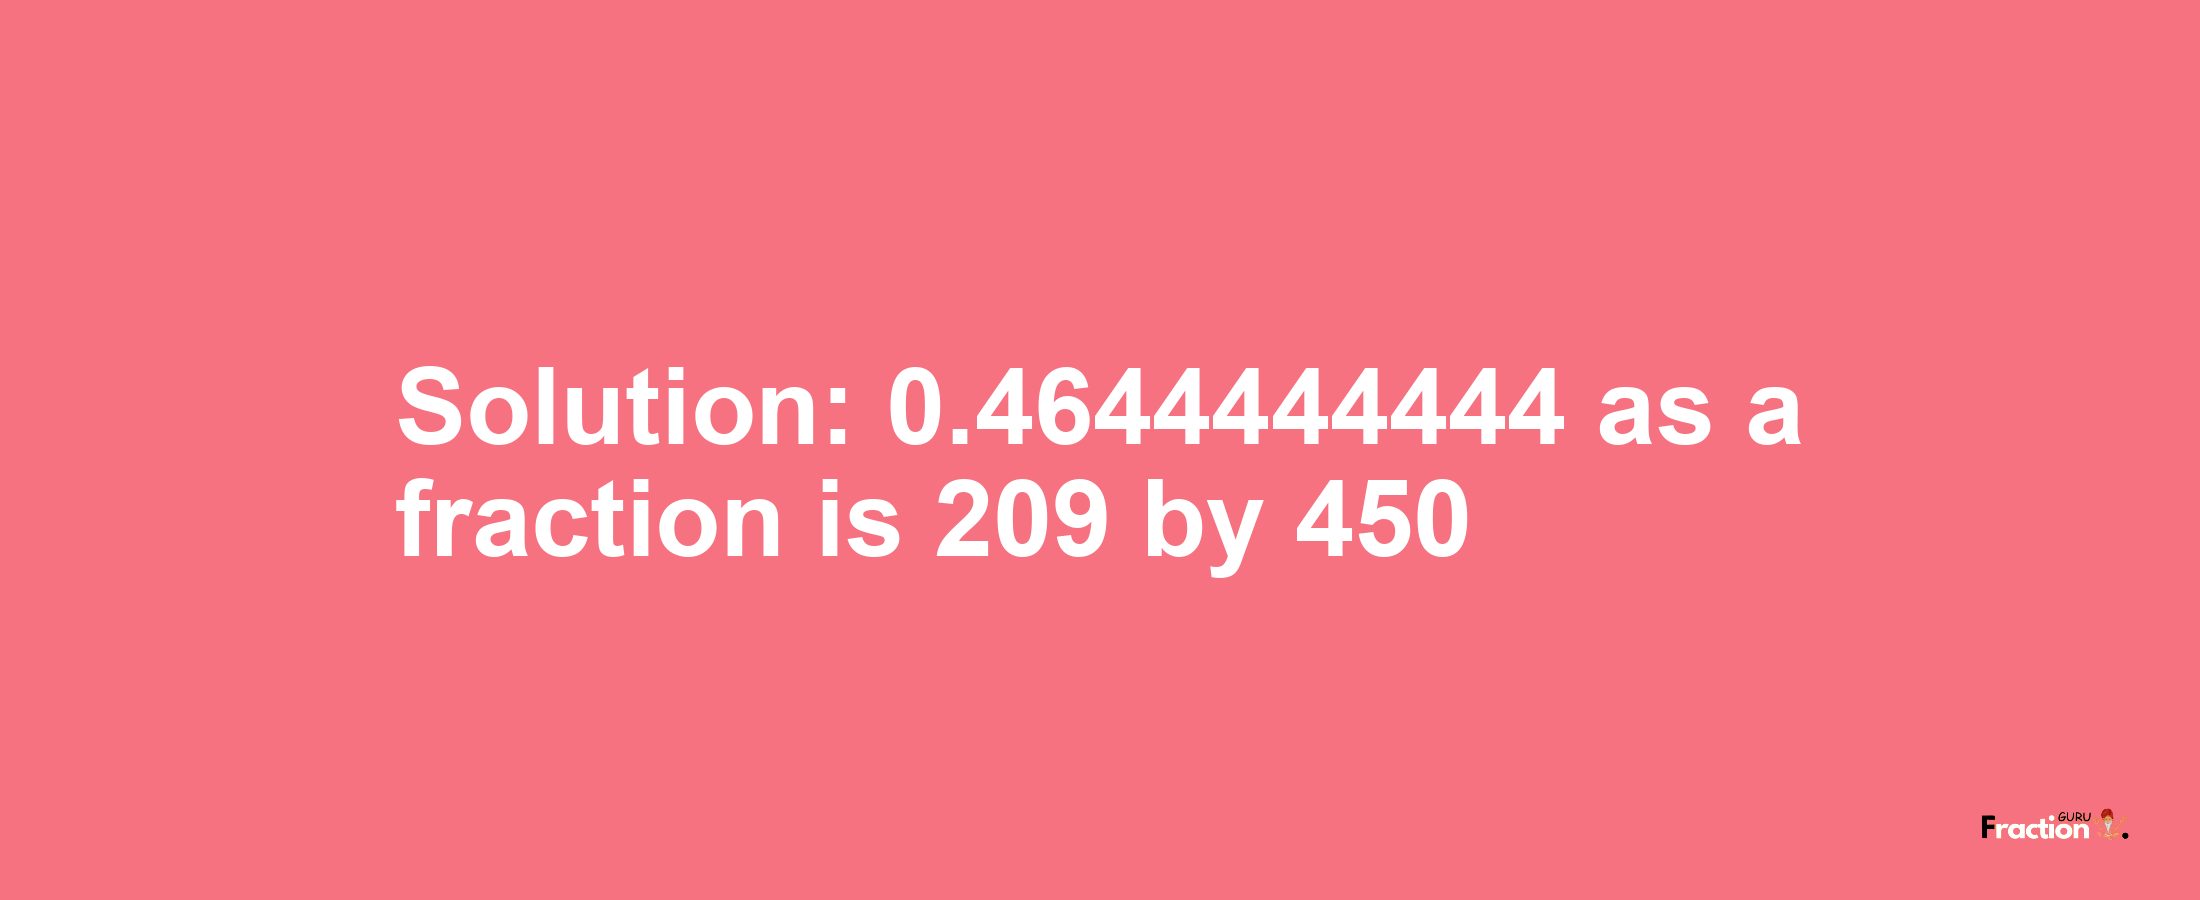 Solution:0.4644444444 as a fraction is 209/450